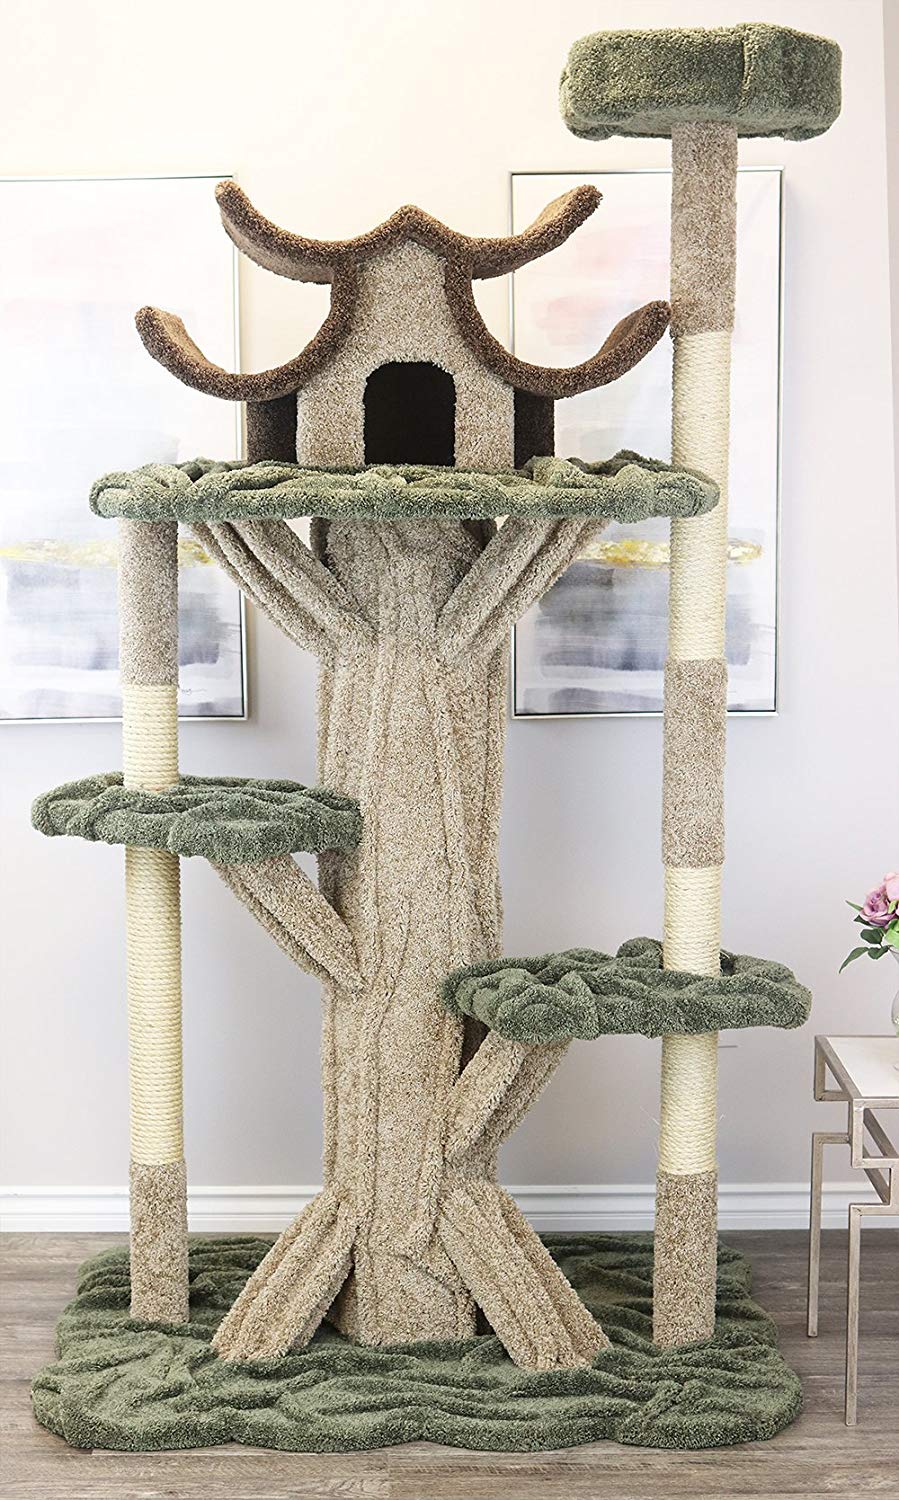 Cat trees carpeted pagodas like this one made of buff and pale green carpet with tree bark accents along the "trunk" really are works of art!